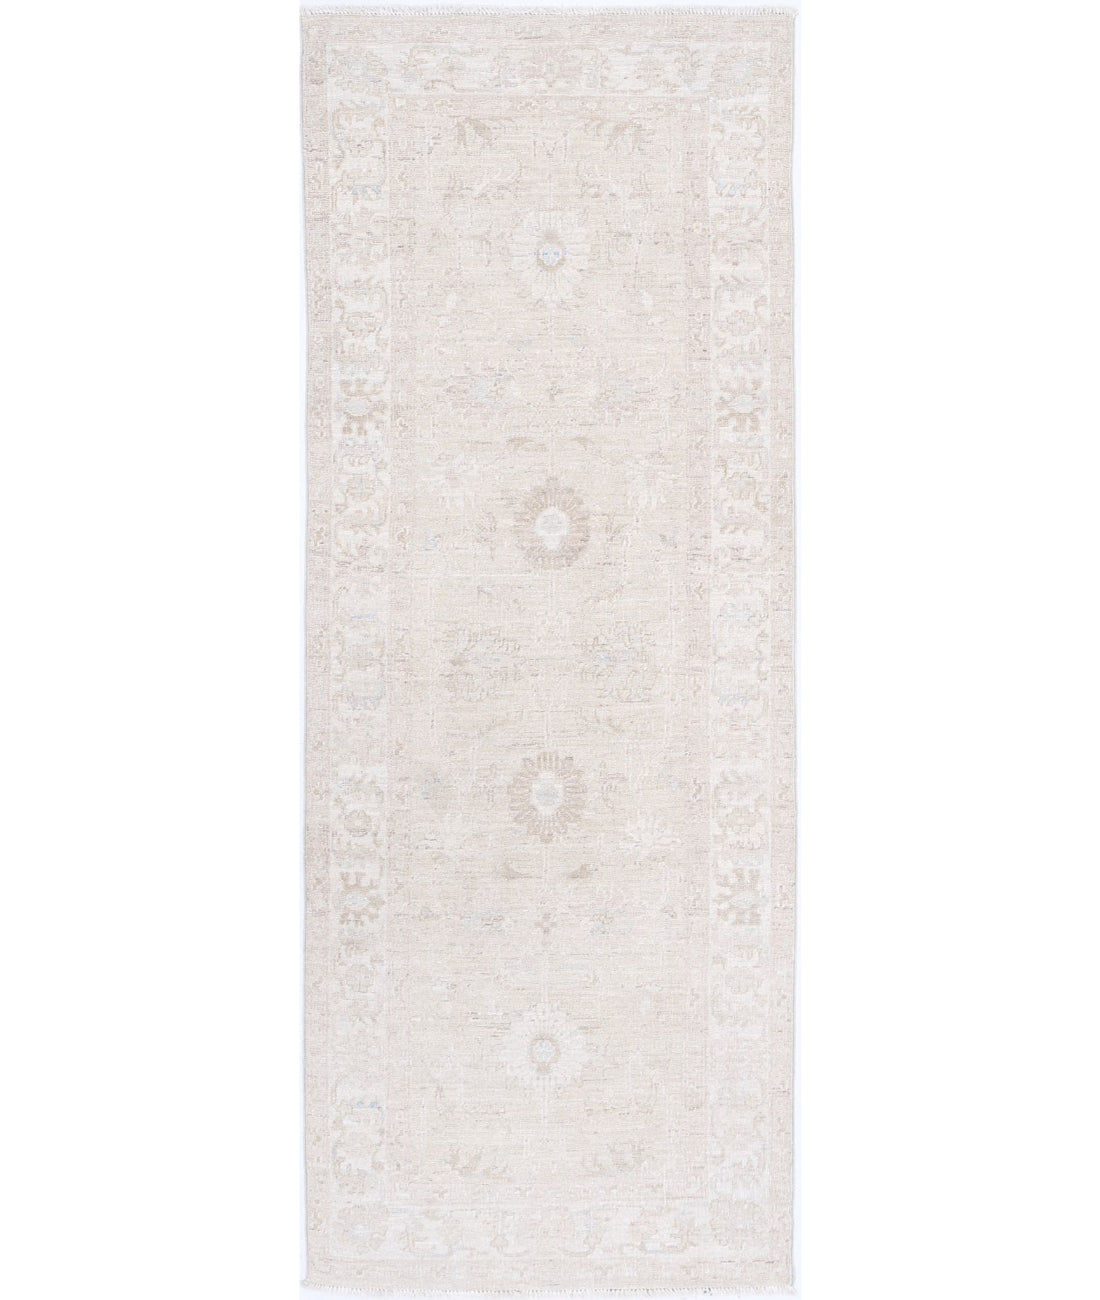 Hand Knotted Serenity Wool Rug - 2'4'' x 6'7'' 2'4'' x 6'7'' (70 X 198) / Taupe / Ivory